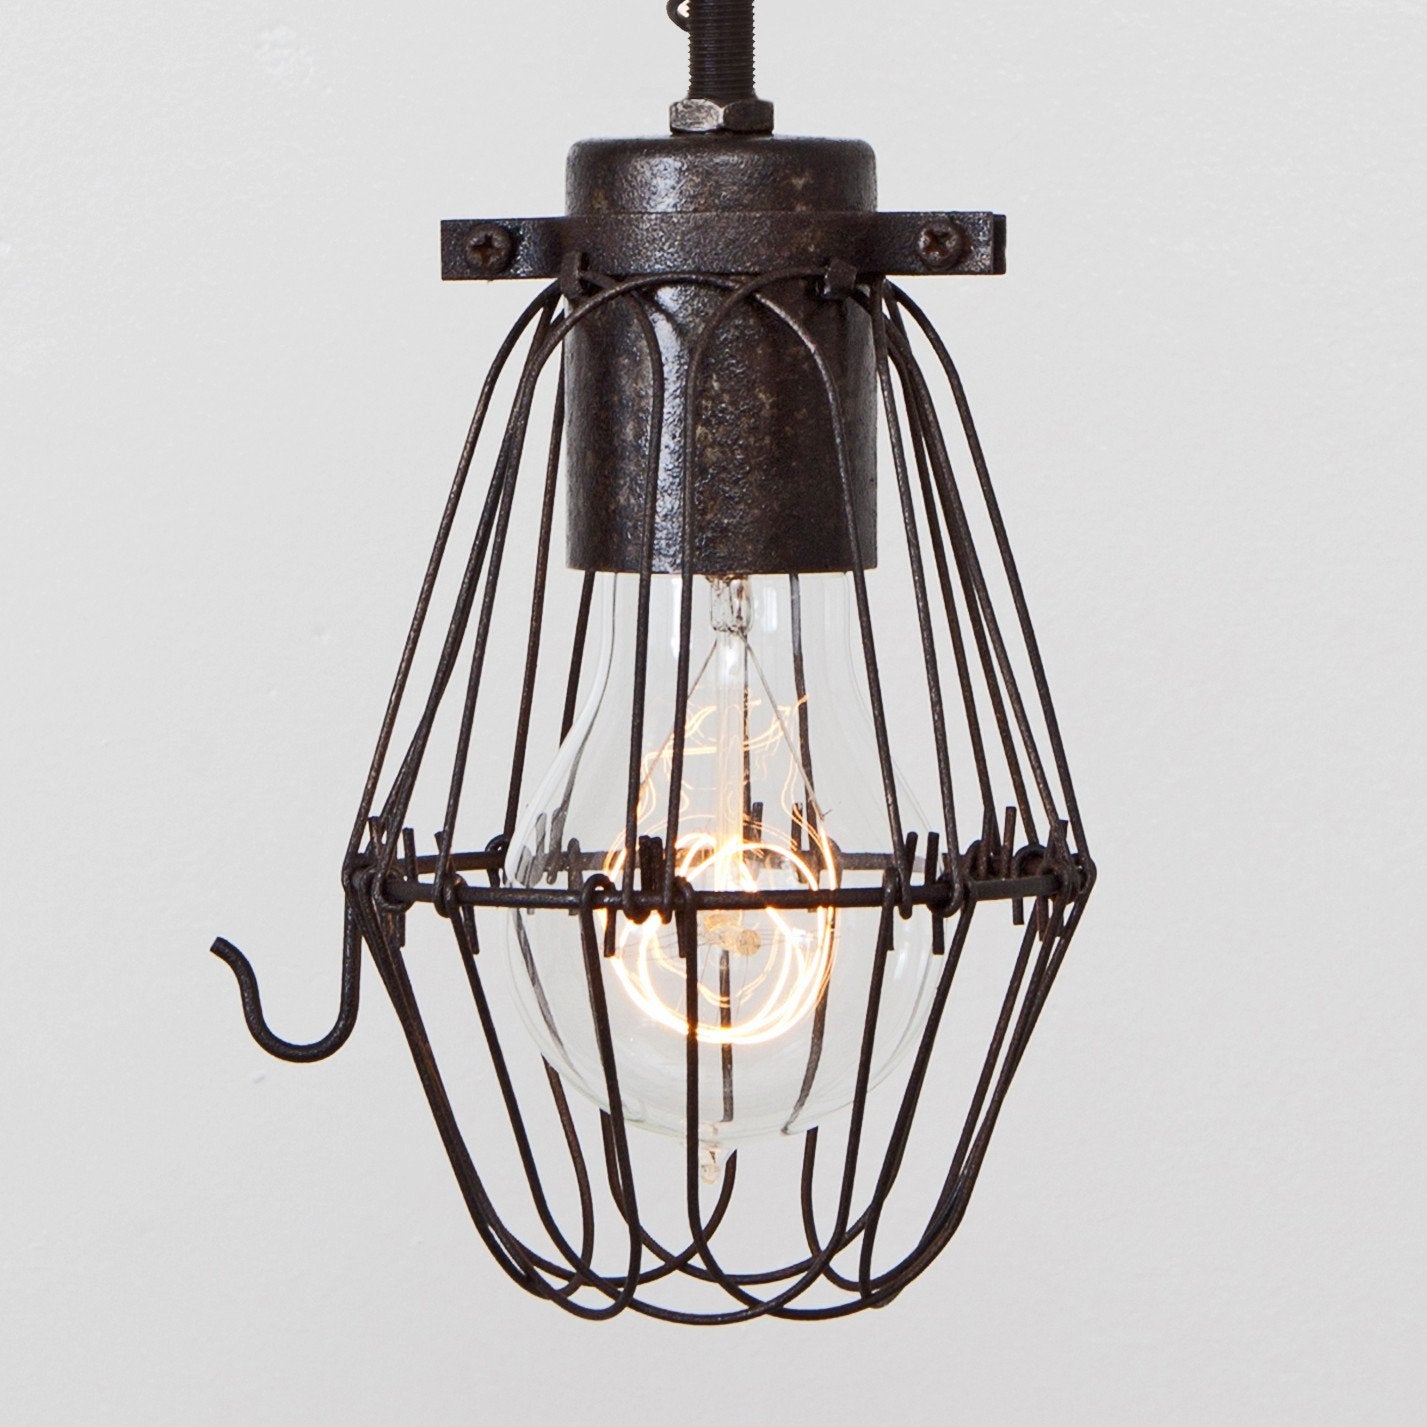 Basic Wire Bulb Cage - Lighting Accessory